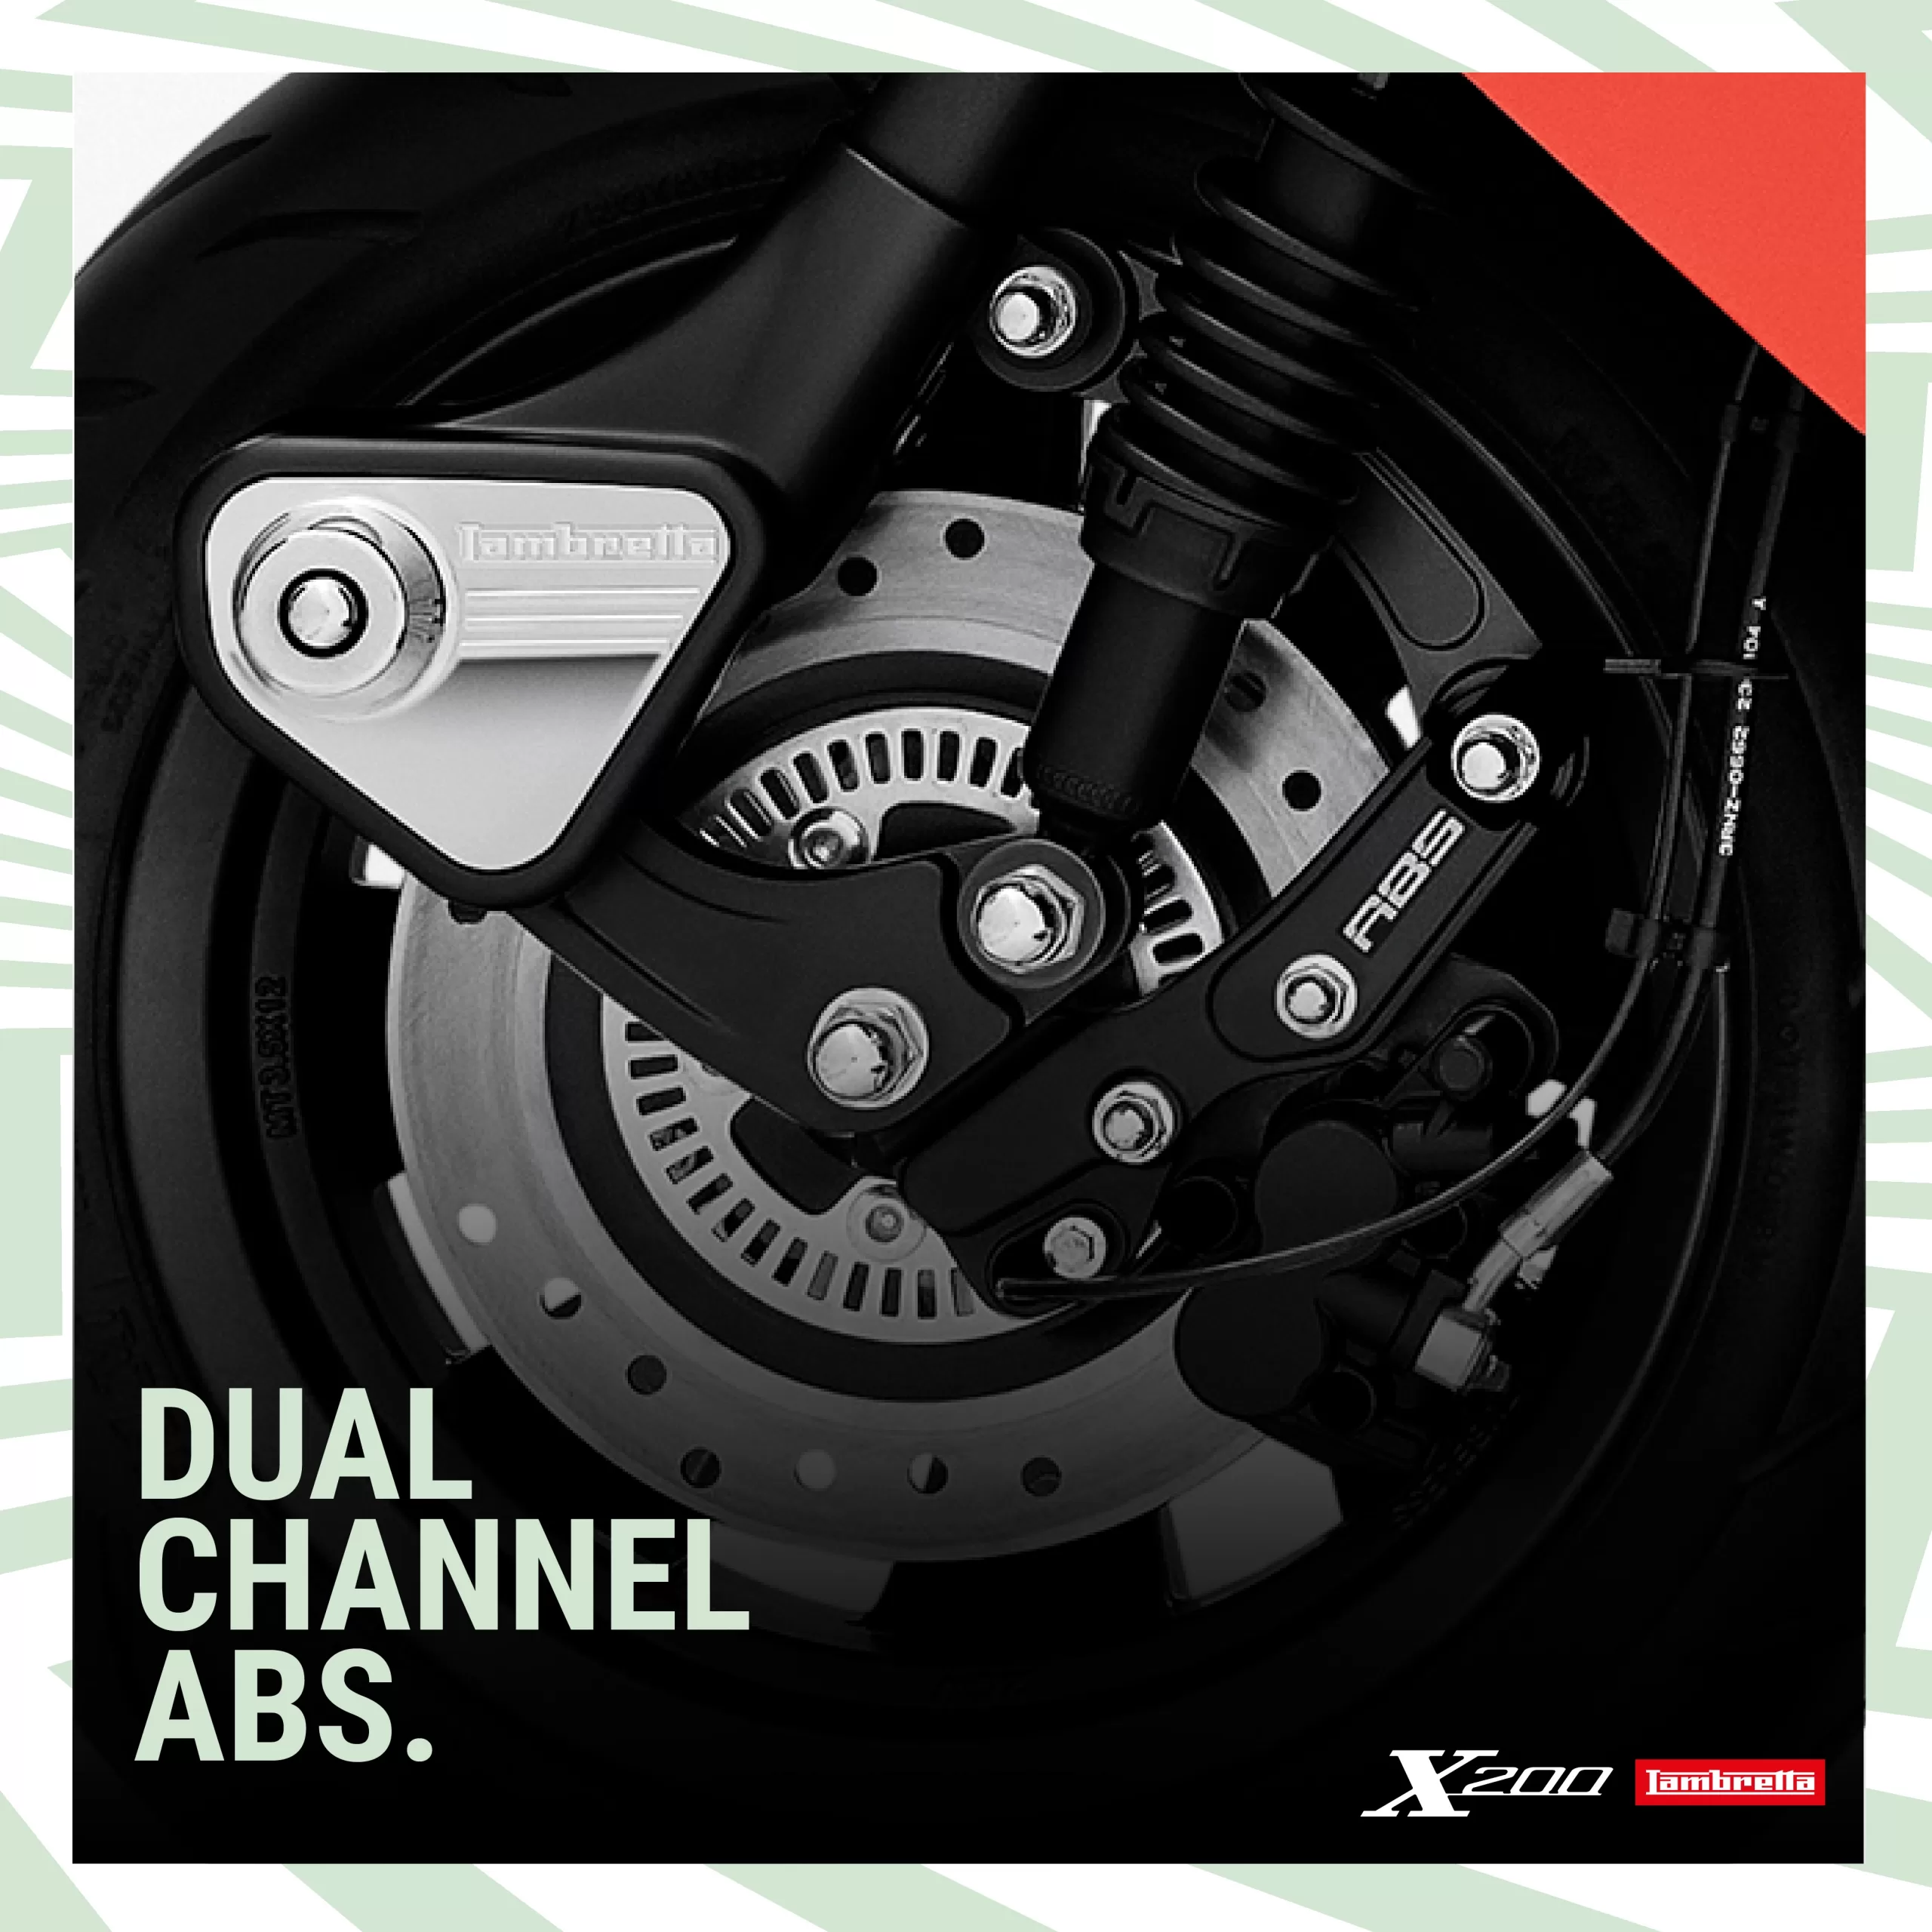 DUAL CHANNEL ABS.